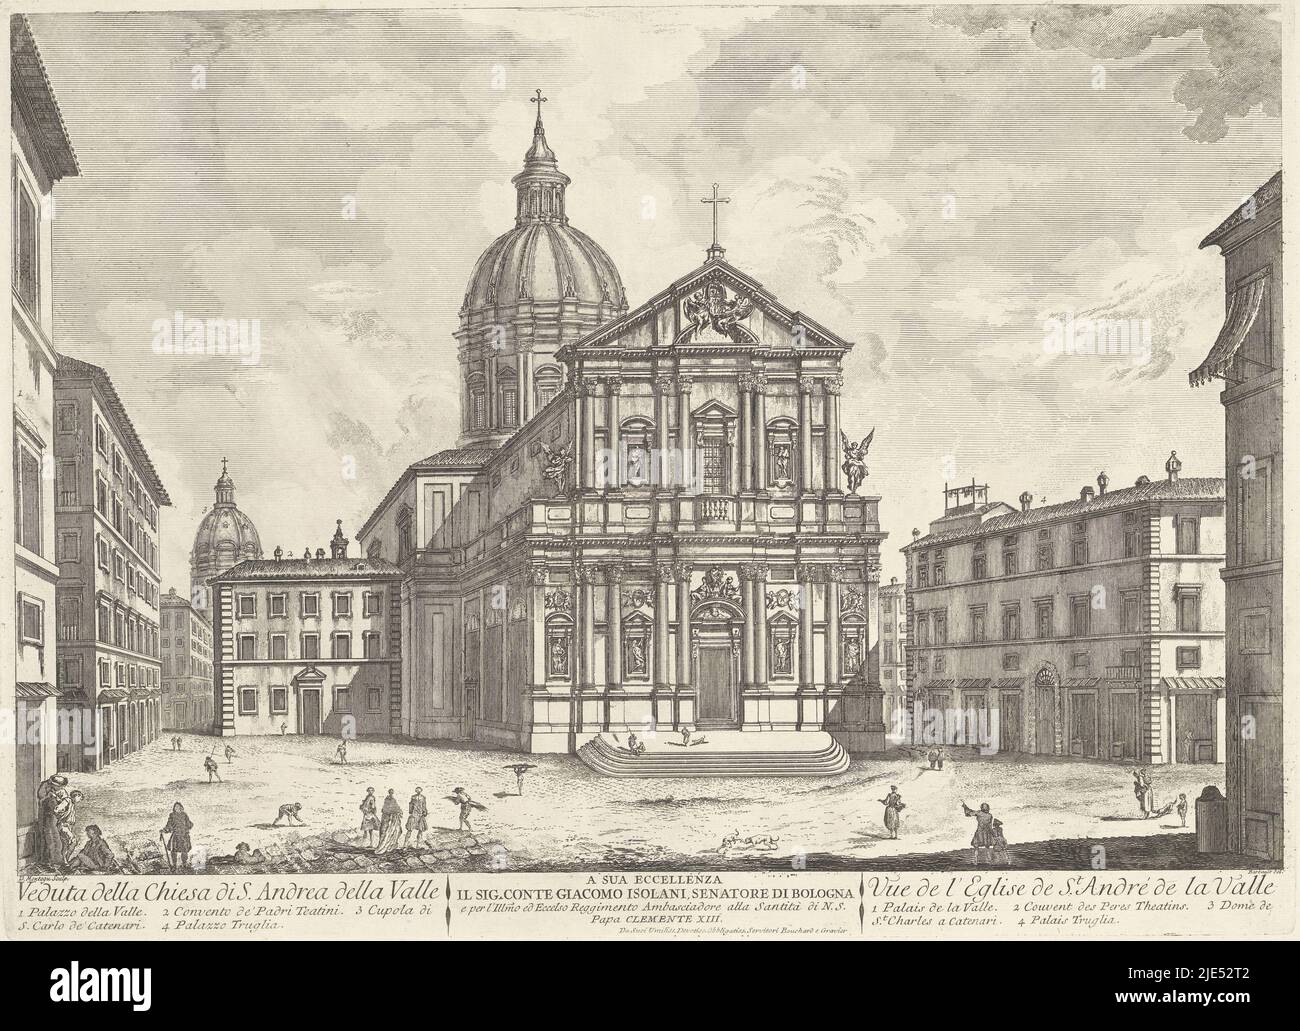 View of the San Andrea della Valle in Rome. Titles and explanatory lists with numbers in French and Italian and an assignment in the lower margin, San Andrea della Valle in Rome Veduta della Chiesa di S. Andrea della Valle / Vue de l'Eglise de St. André de la Valle., print maker: Domenico Montaigù, (mentioned on object), intermediary draughtsman: Jean Barbault, (mentioned on object), J. Bouchard & J.J. Gravier, (mentioned on object), Italy, c. 1750 - c. 1799, paper, etching, h 389 mm × w 532 mm Stock Photo